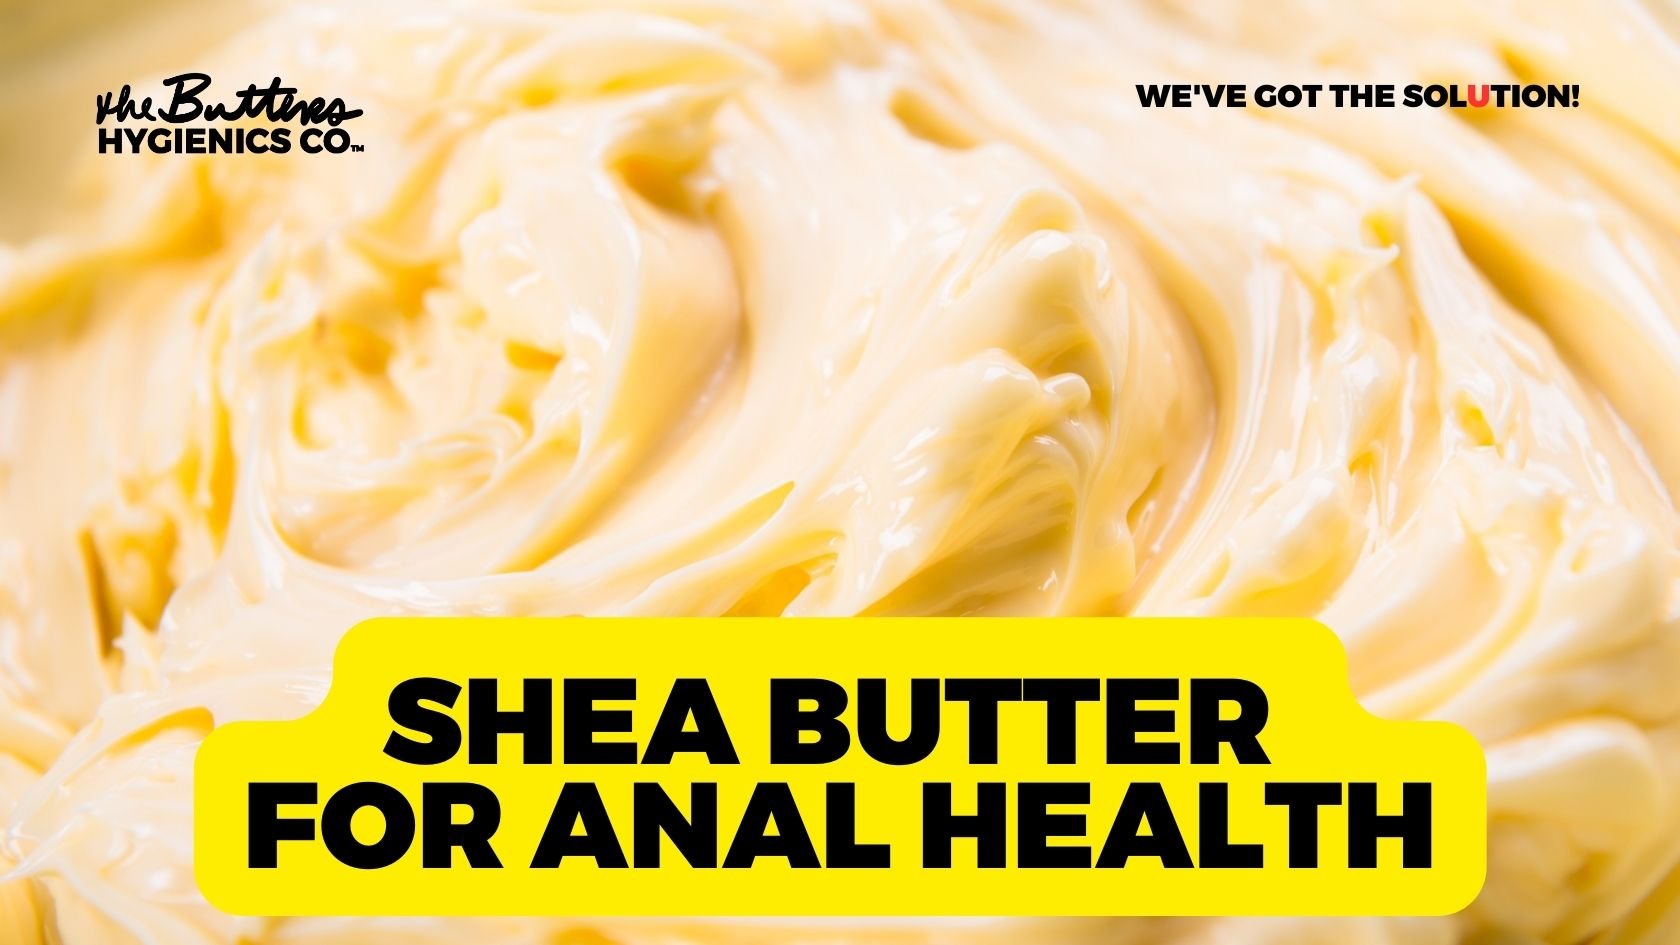 Shea Butter Booty Benefits of Shea Butter for Anal Sex, Hygiene — The Butters Hygienics